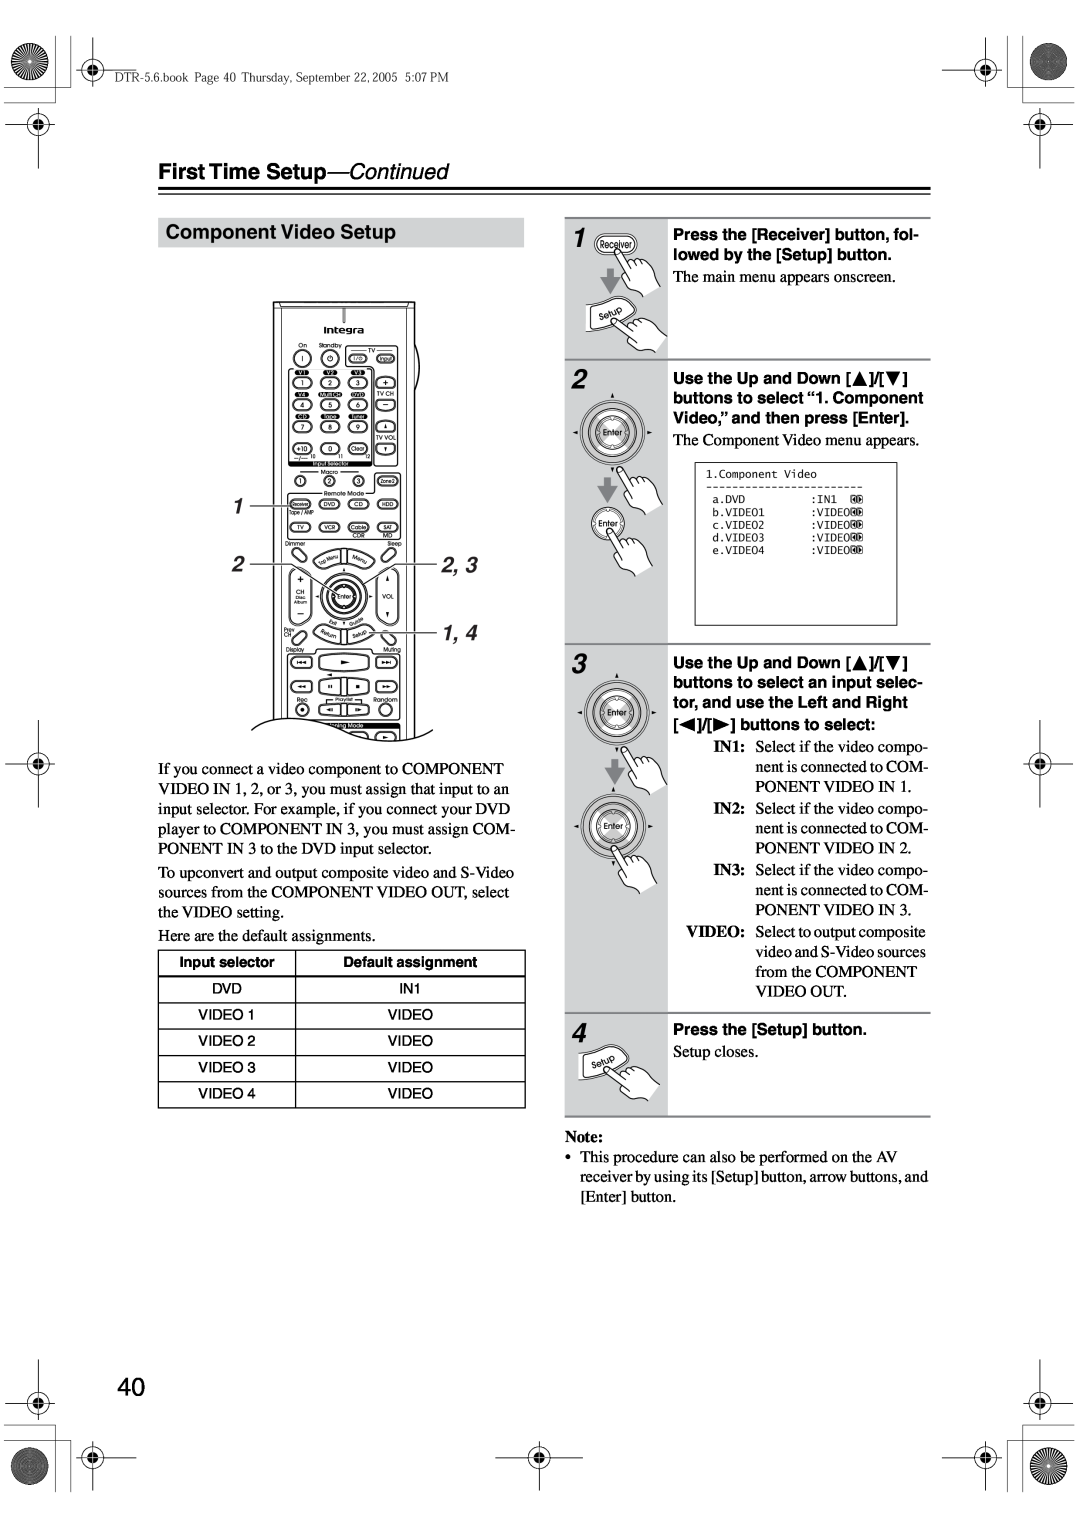 Integra DTR-5.6 instruction manual 1 22, Component Video Setup, First Time Setup—Continued 